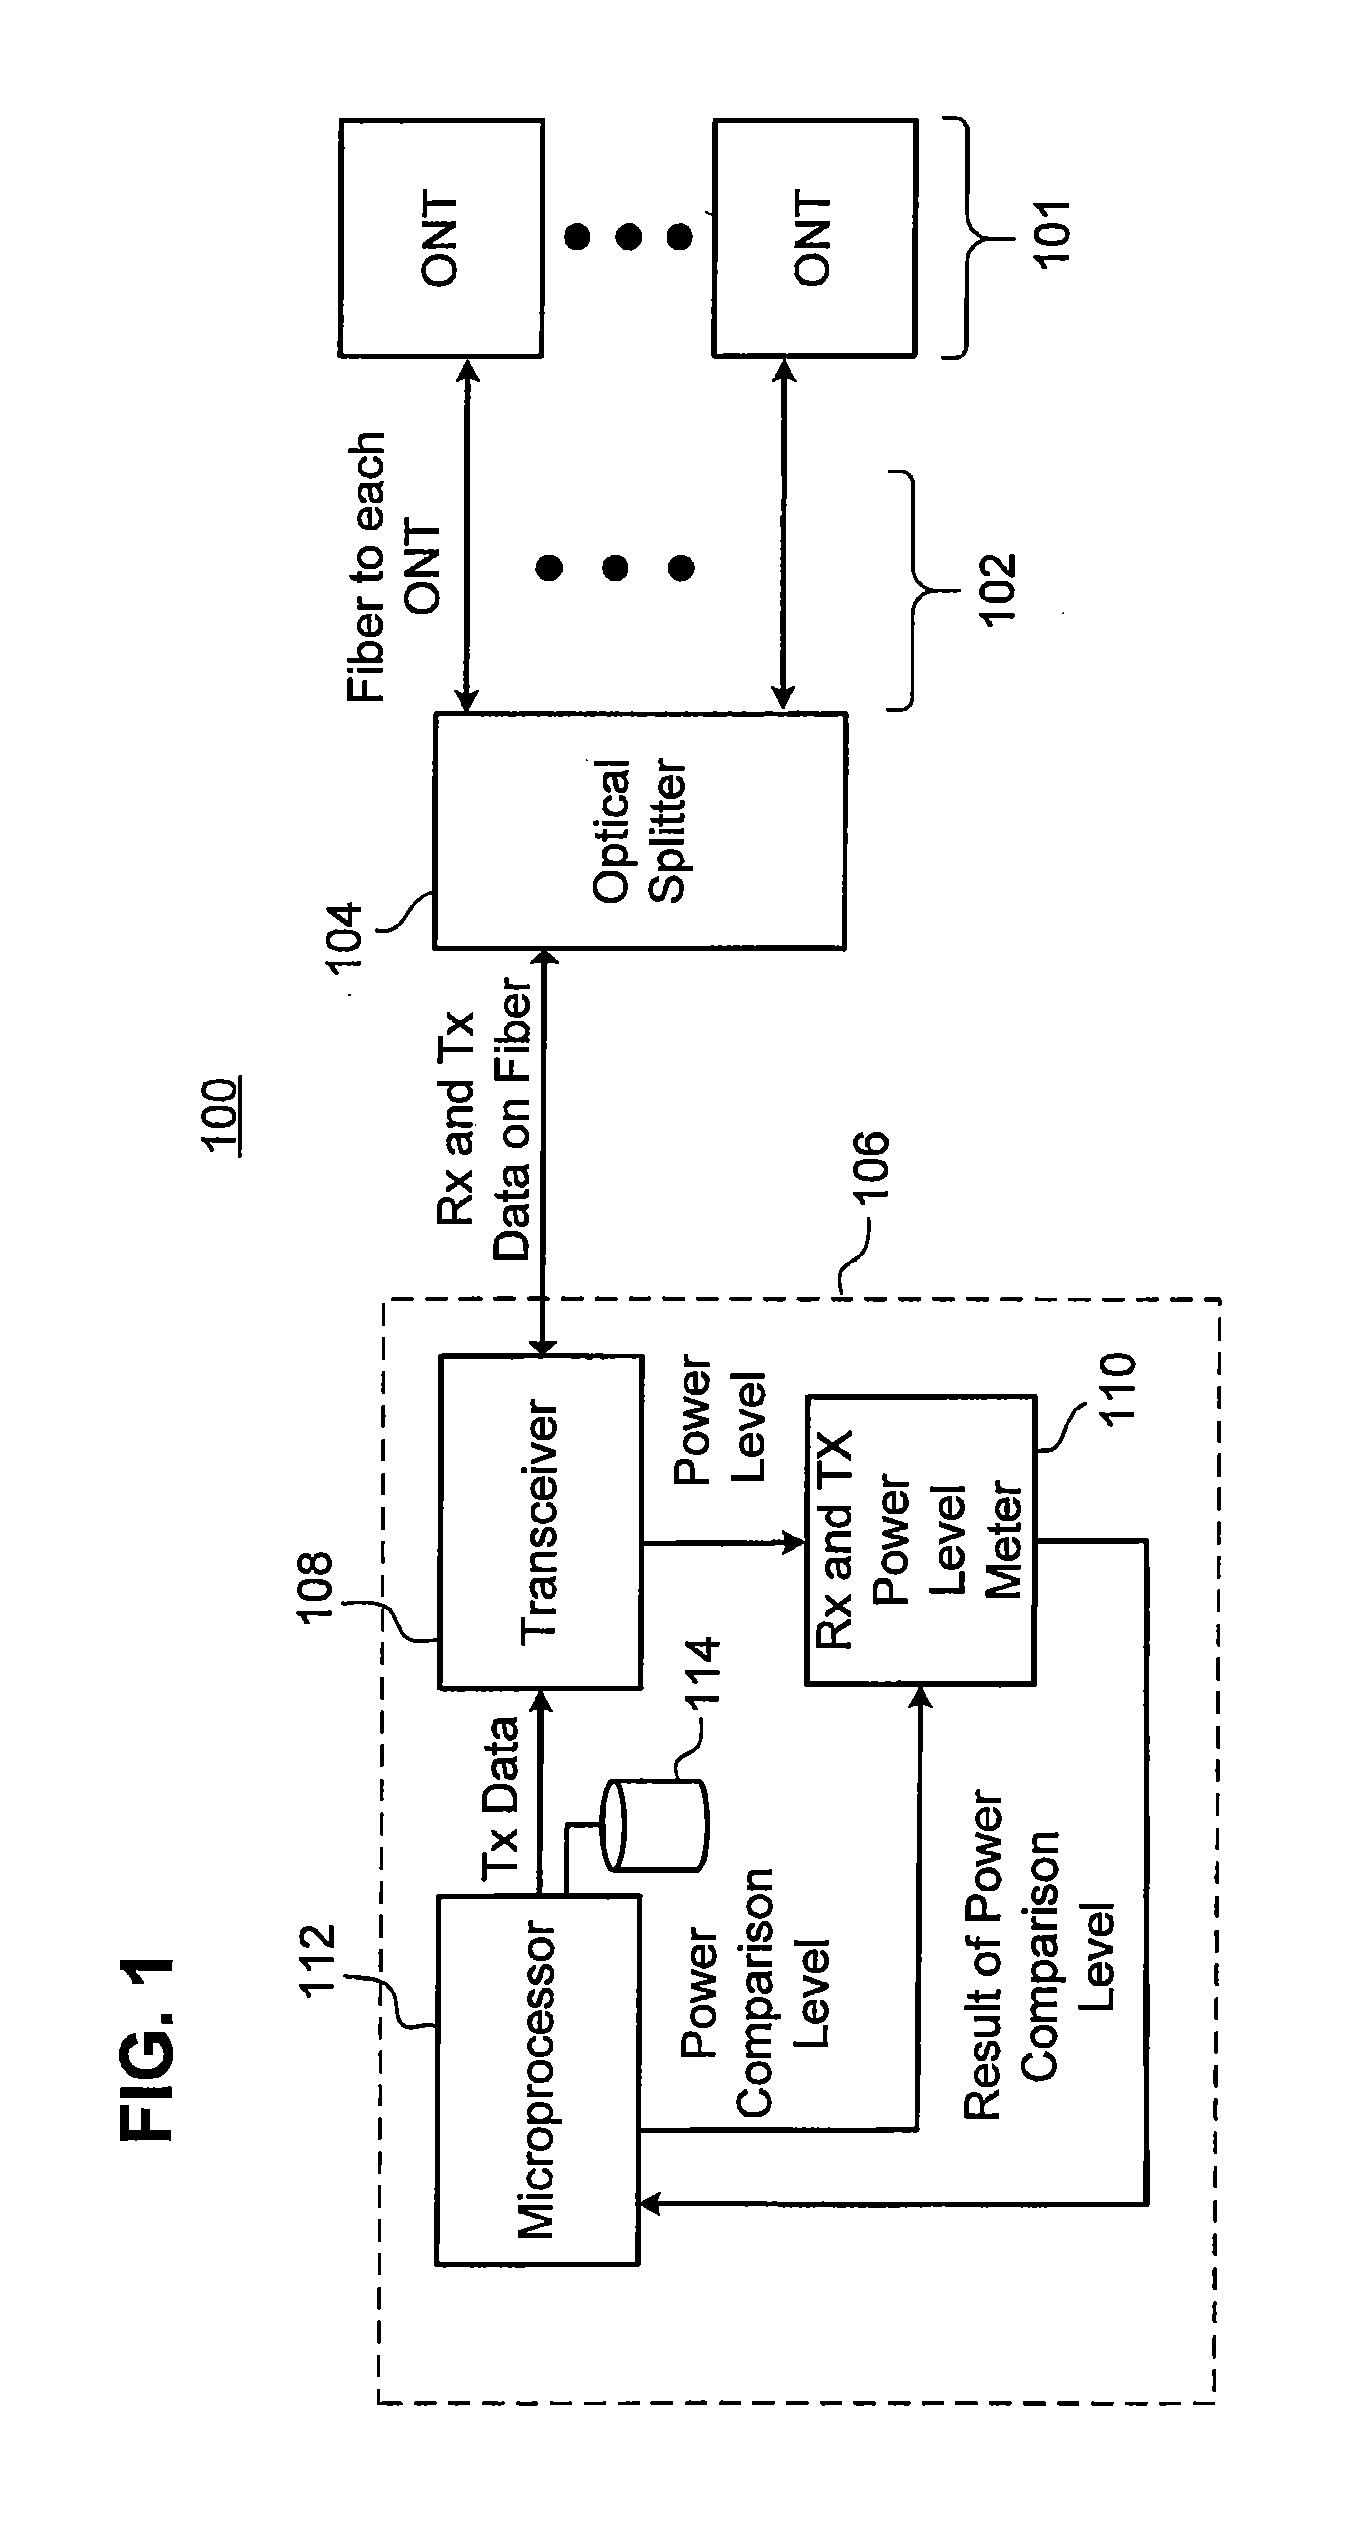 Method, apparatus, system and computer program product for identifying failing or failed optical network terminal(s) on an optical distribution network